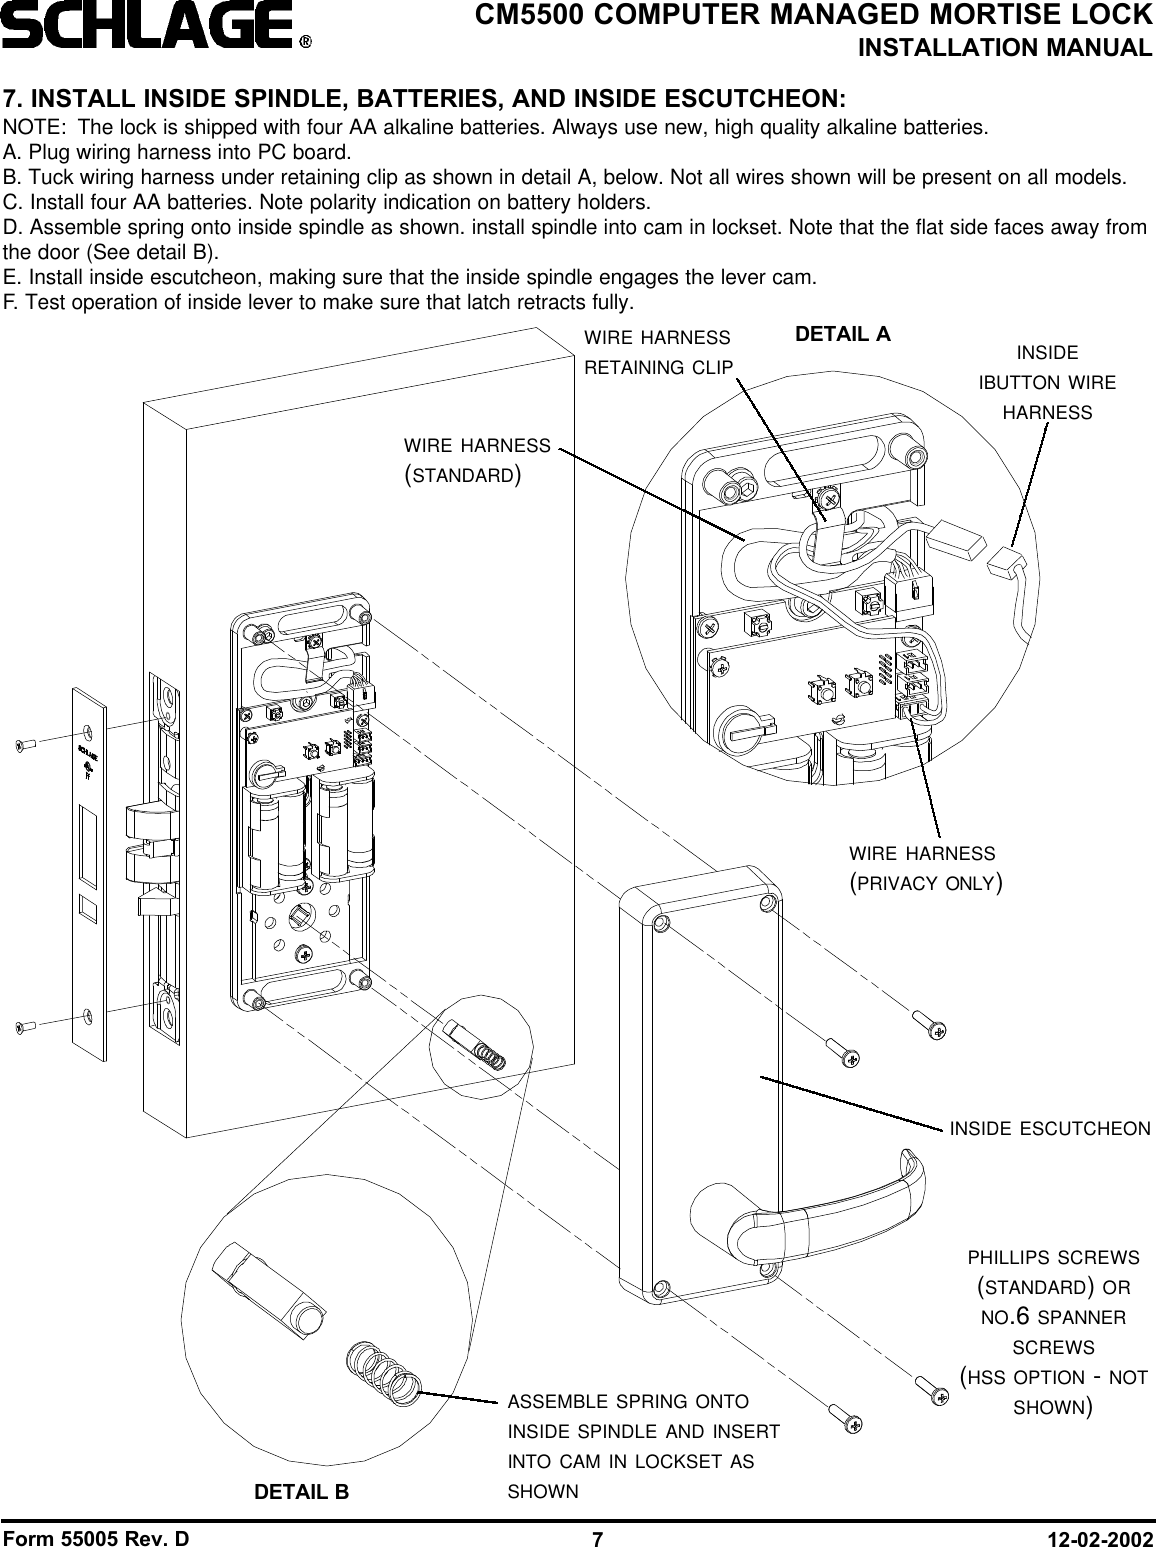 Form 55005 Rev. D 12-02-20027CM5500 COMPUTER MANAGED MORTISE LOCKINSTALLATION MANUALASSEMBLE SPRING ONTOINSIDE SPINDLE AND INSERTINTO CAM IN LOCKSET ASSHOWNINSIDE ESCUTCHEONPHILLIPS SCREWS(STANDARD) ORNO.6 SPANNERSCREWS(HSS OPTION - NOTSHOWN)7. INSTALL INSIDE SPINDLE, BATTERIES, AND INSIDE ESCUTCHEON:NOTE: The lock is shipped with four AA alkaline batteries. Always use new, high quality alkaline batteries.A. Plug wiring harness into PC board.B. Tuck wiring harness under retaining clip as shown in detail A, below. Not all wires shown will be present on all models.C. Install four AA batteries. Note polarity indication on battery holders.D. Assemble spring onto inside spindle as shown. install spindle into cam in lockset. Note that the flat side faces away fromthe door (See detail B).E. Install inside escutcheon, making sure that the inside spindle engages the lever cam.F. Test operation of inside lever to make sure that latch retracts fully.DETAIL BWIRE HARNESSRETAINING CLIPDETAIL A INSIDEIBUTTON WIREHARNESSWIRE HARNESS(PRIVACY ONLY)WIRE HARNESS(STANDARD)